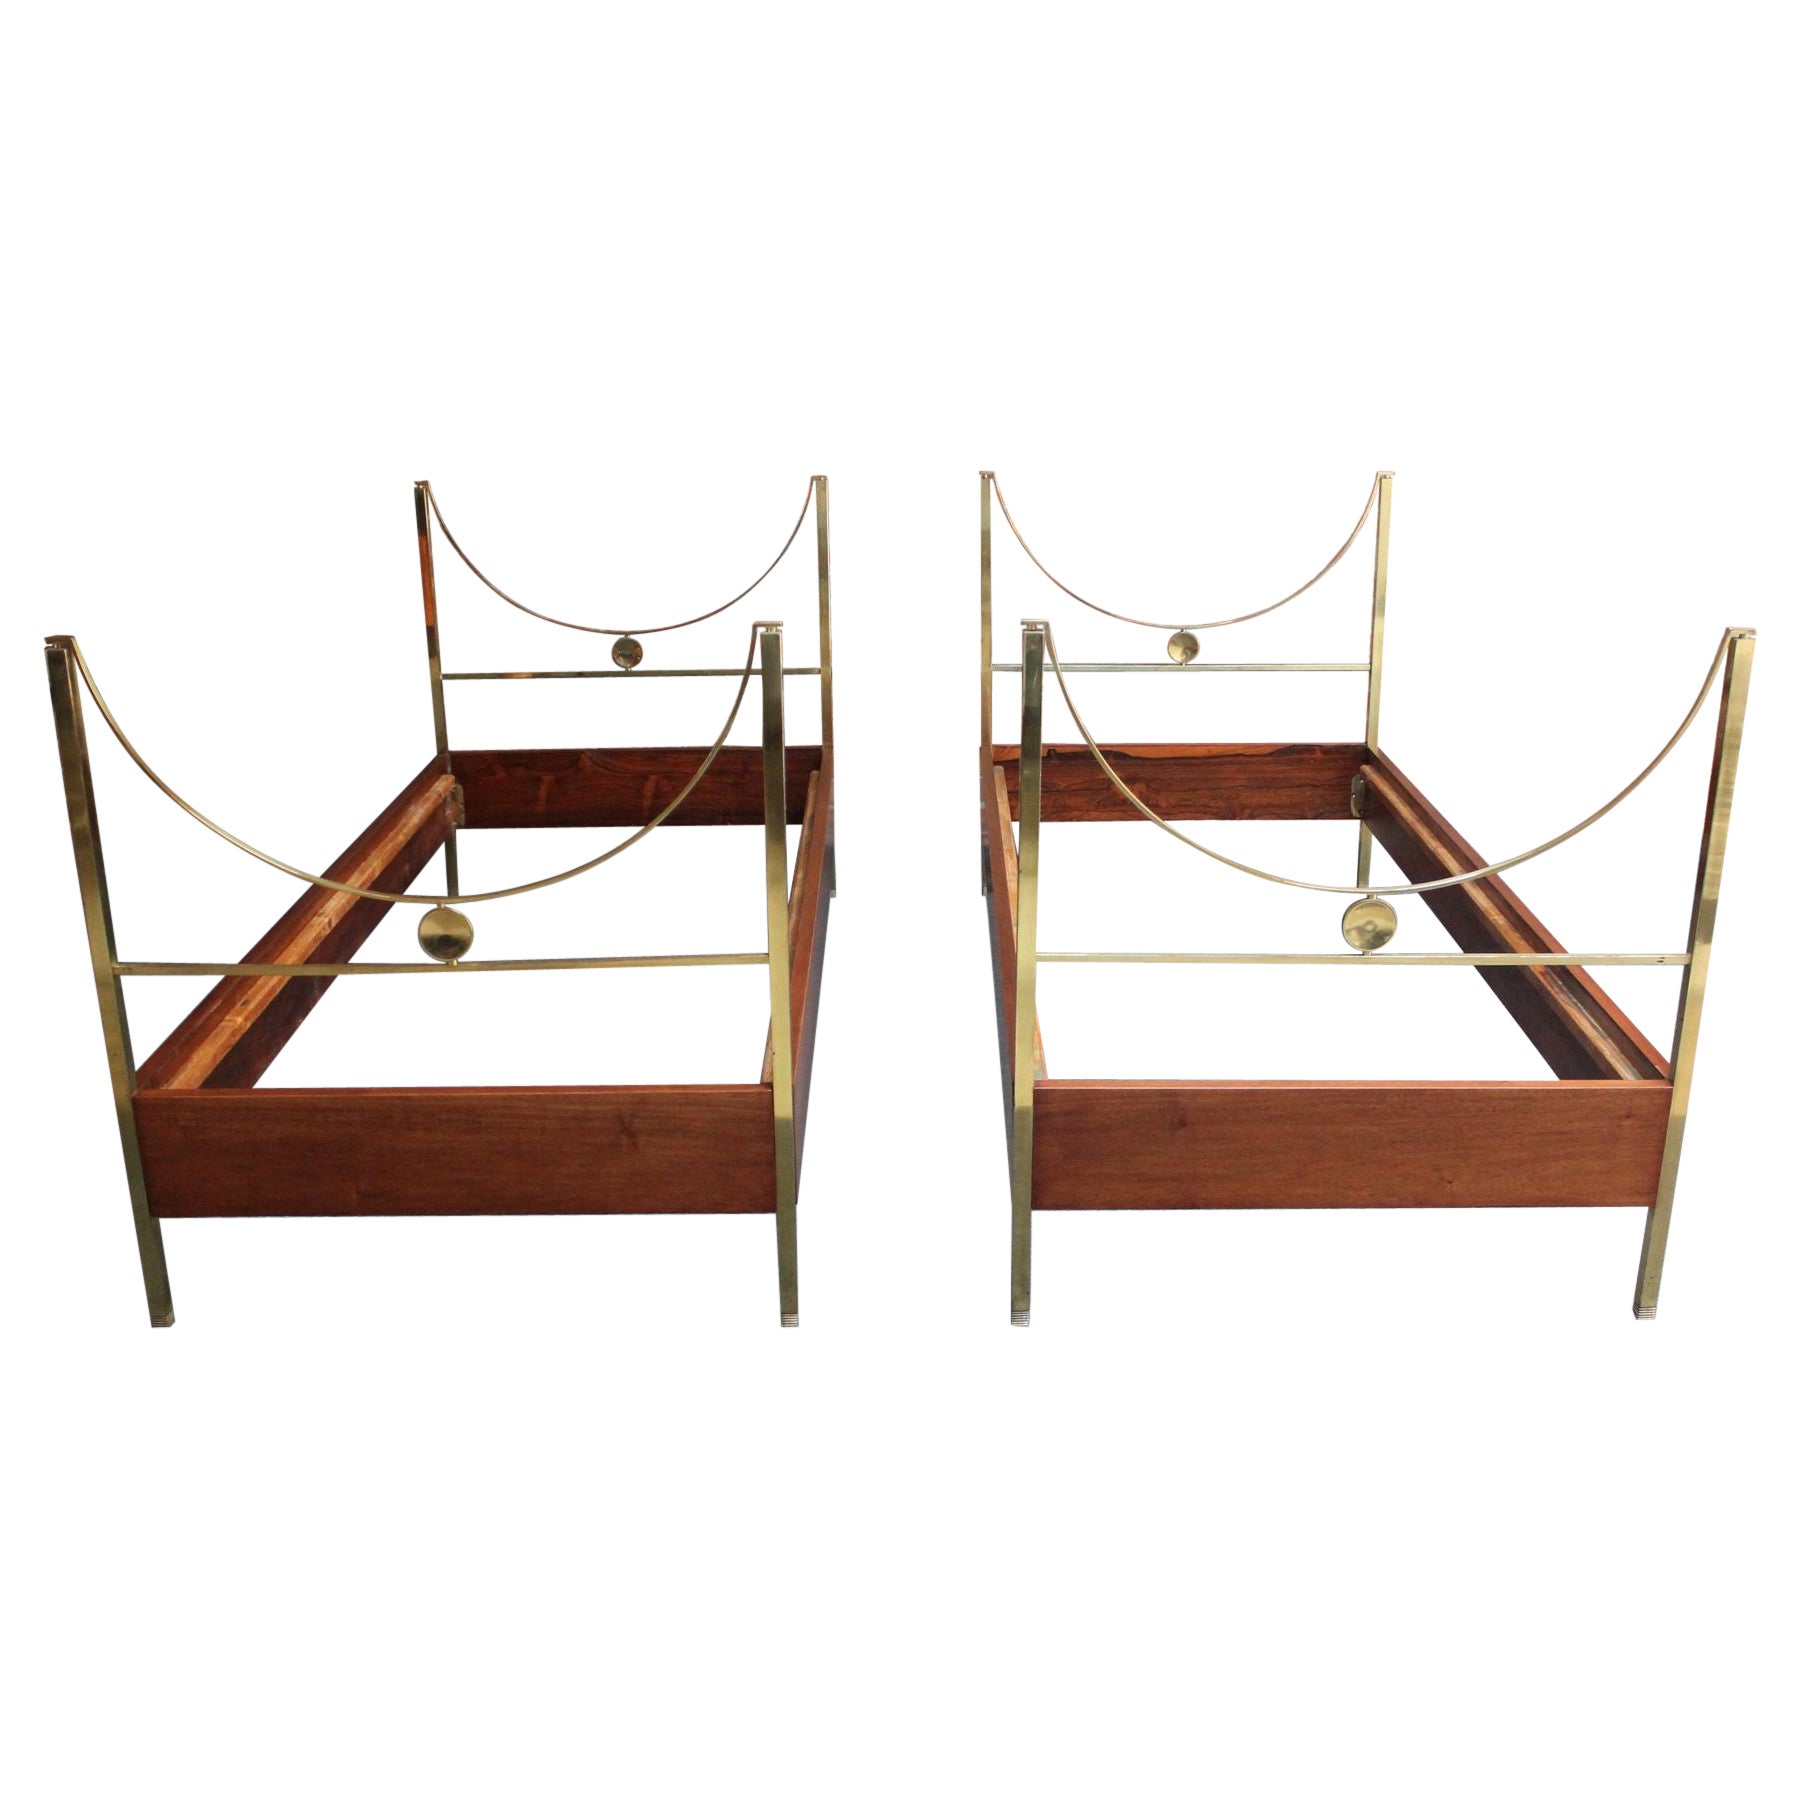 Pair of Vintage Italian Mahogany and Brass Beds by Carlo de Carli for Sormani